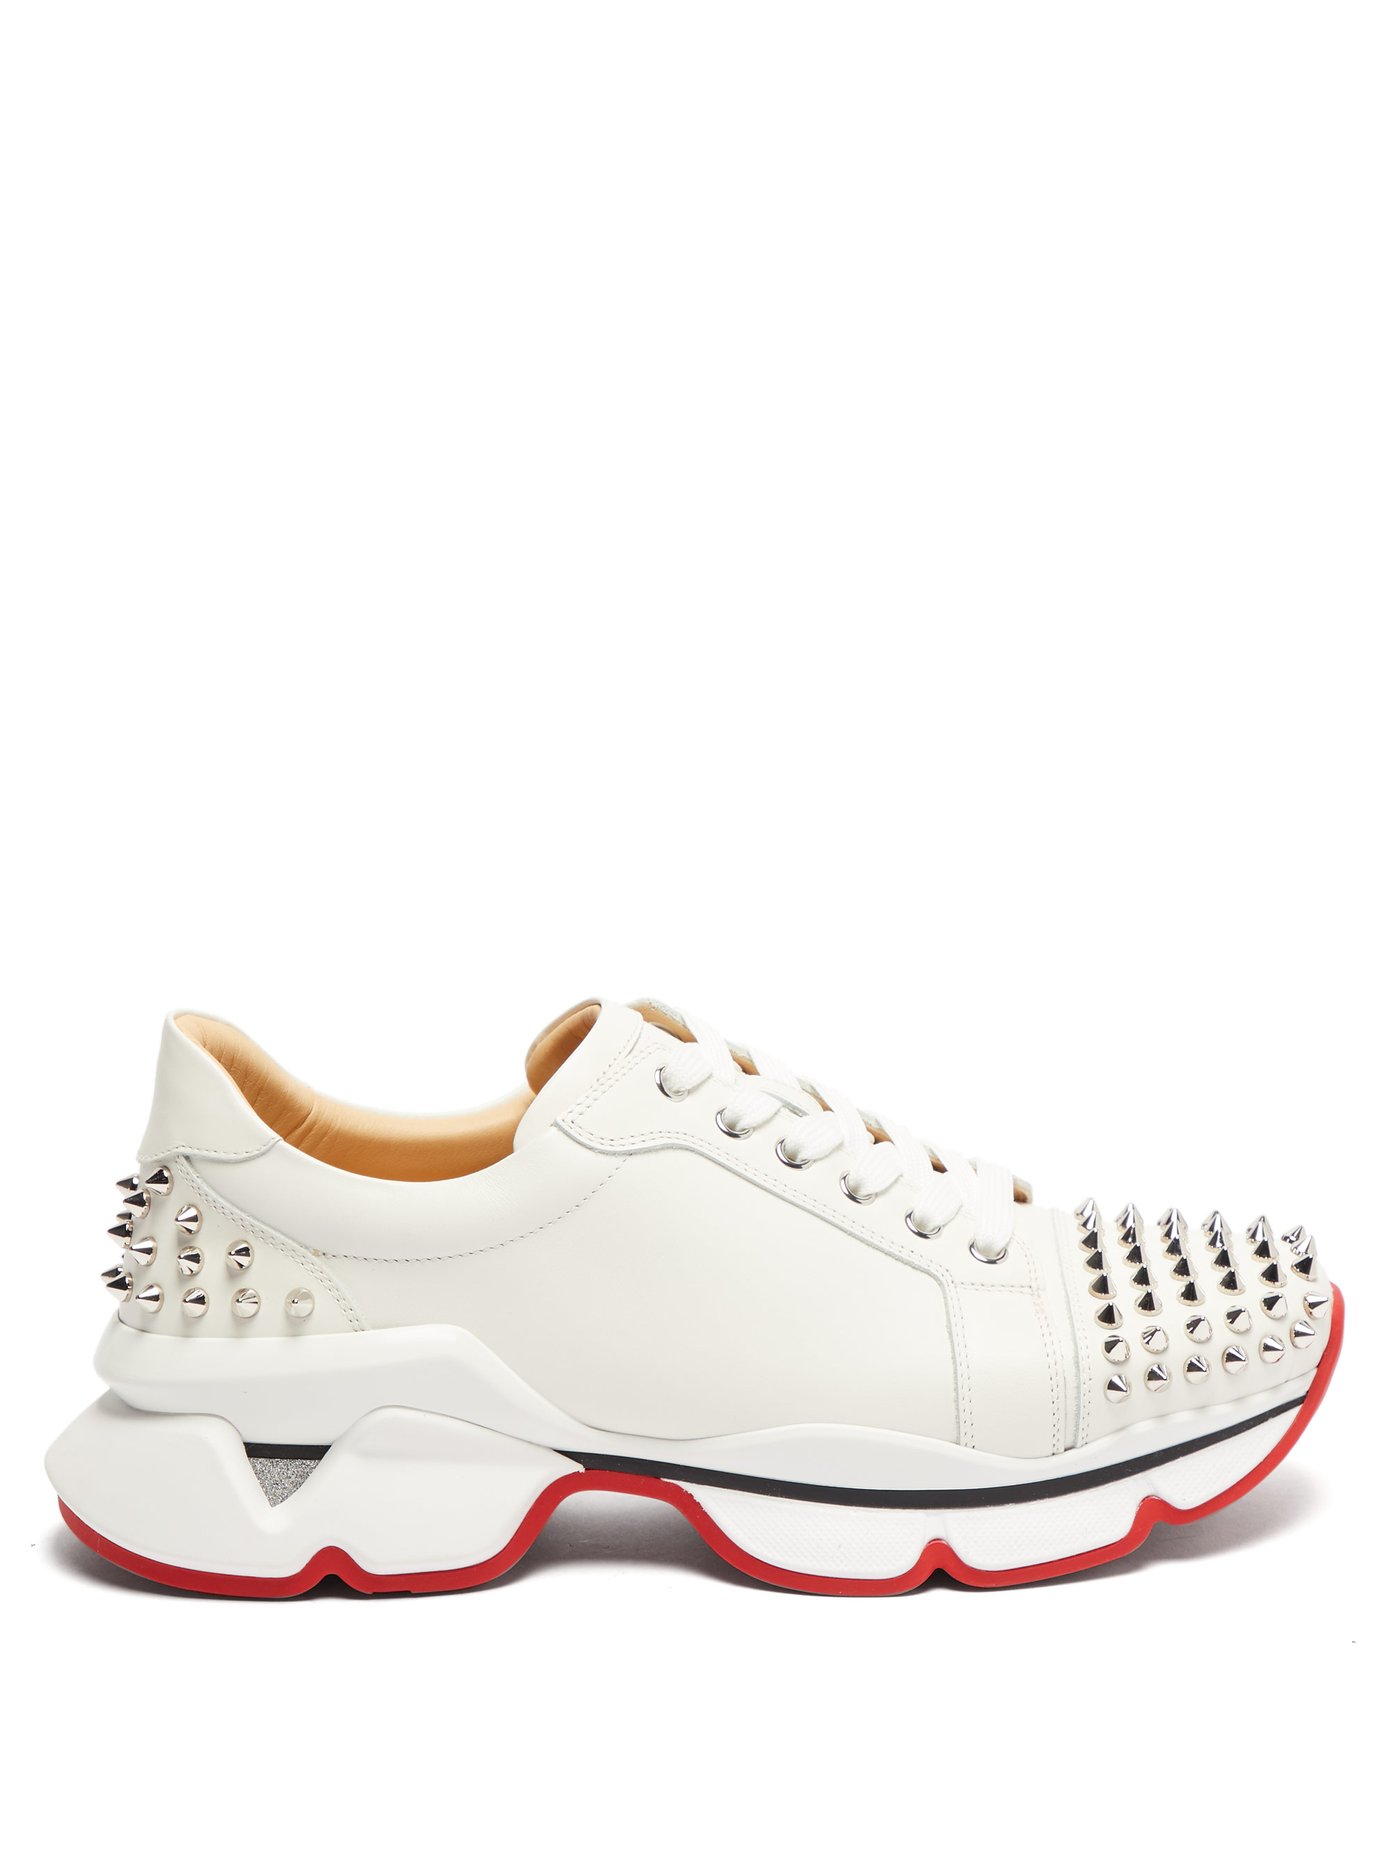 mens white louboutin spiked trainers